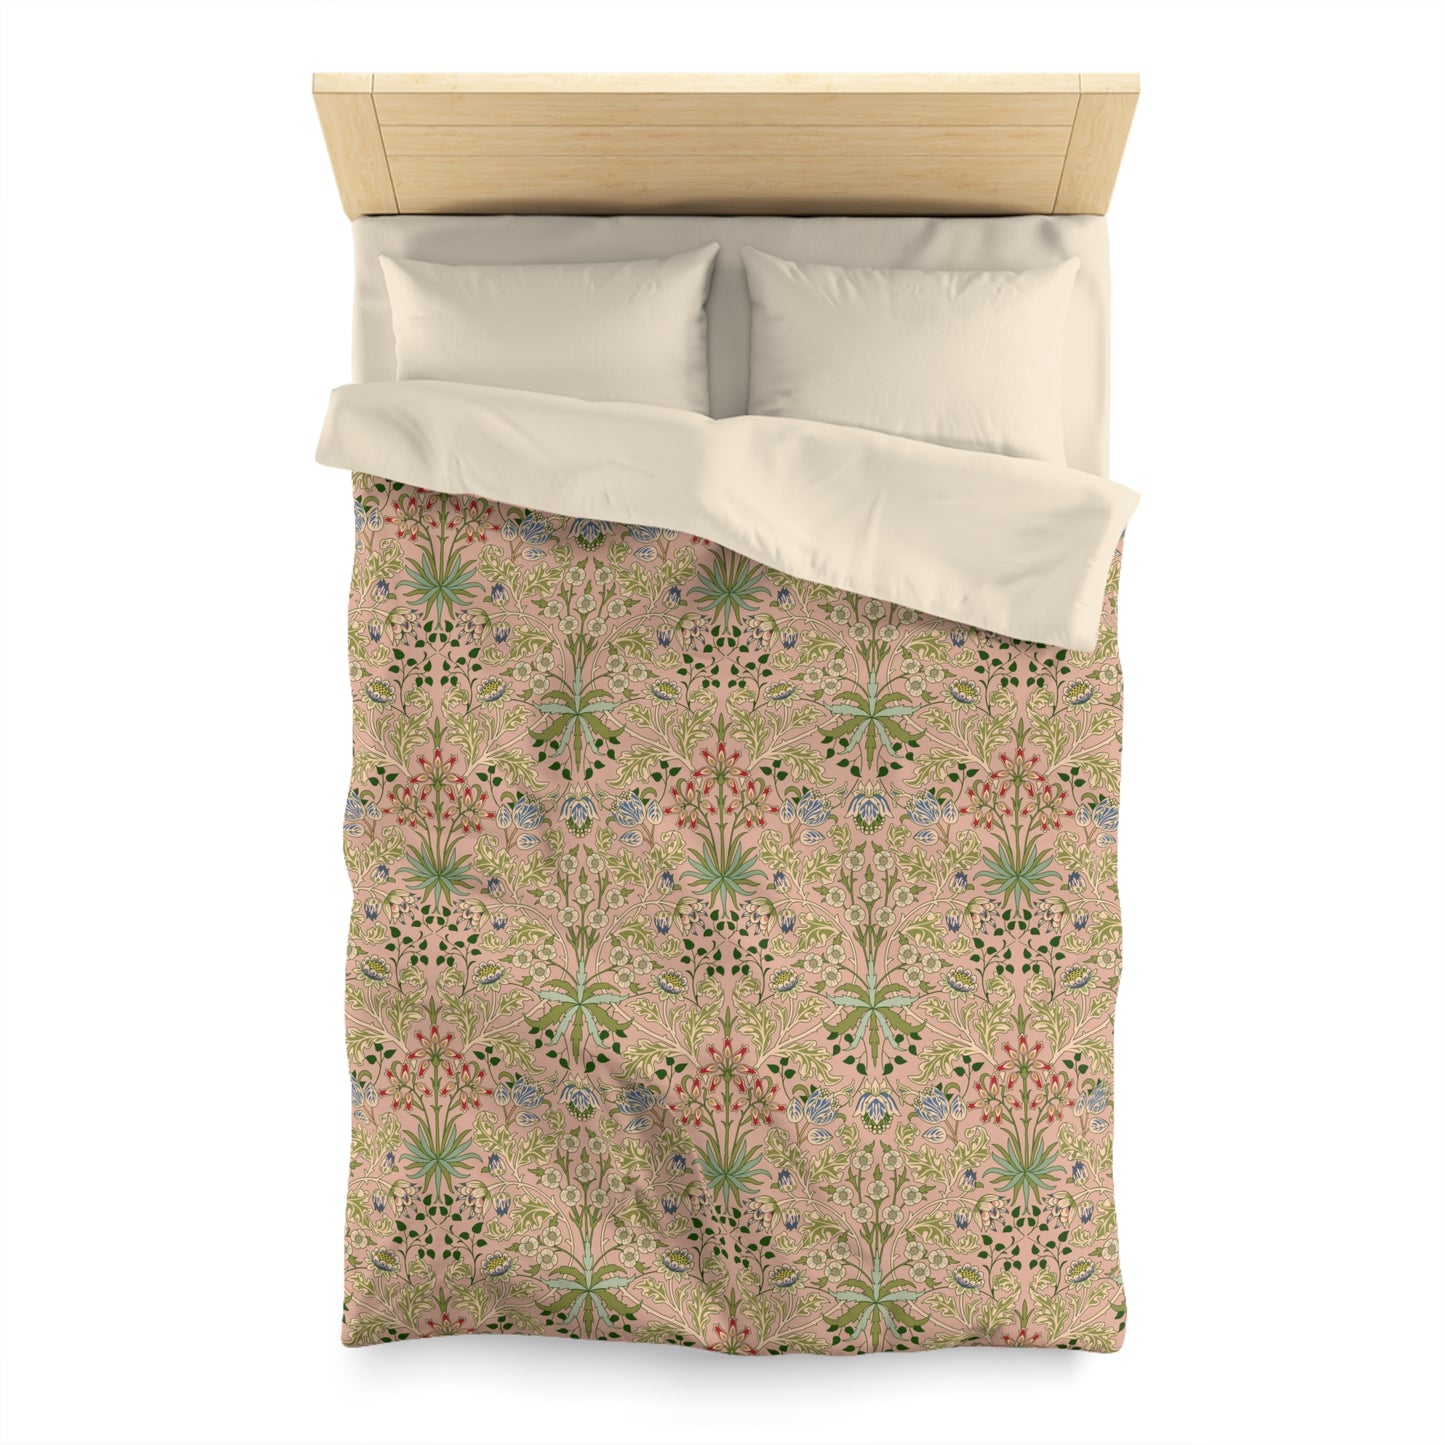 william-morris-co-duvet-cover-hyacinth-collection-blossom-3